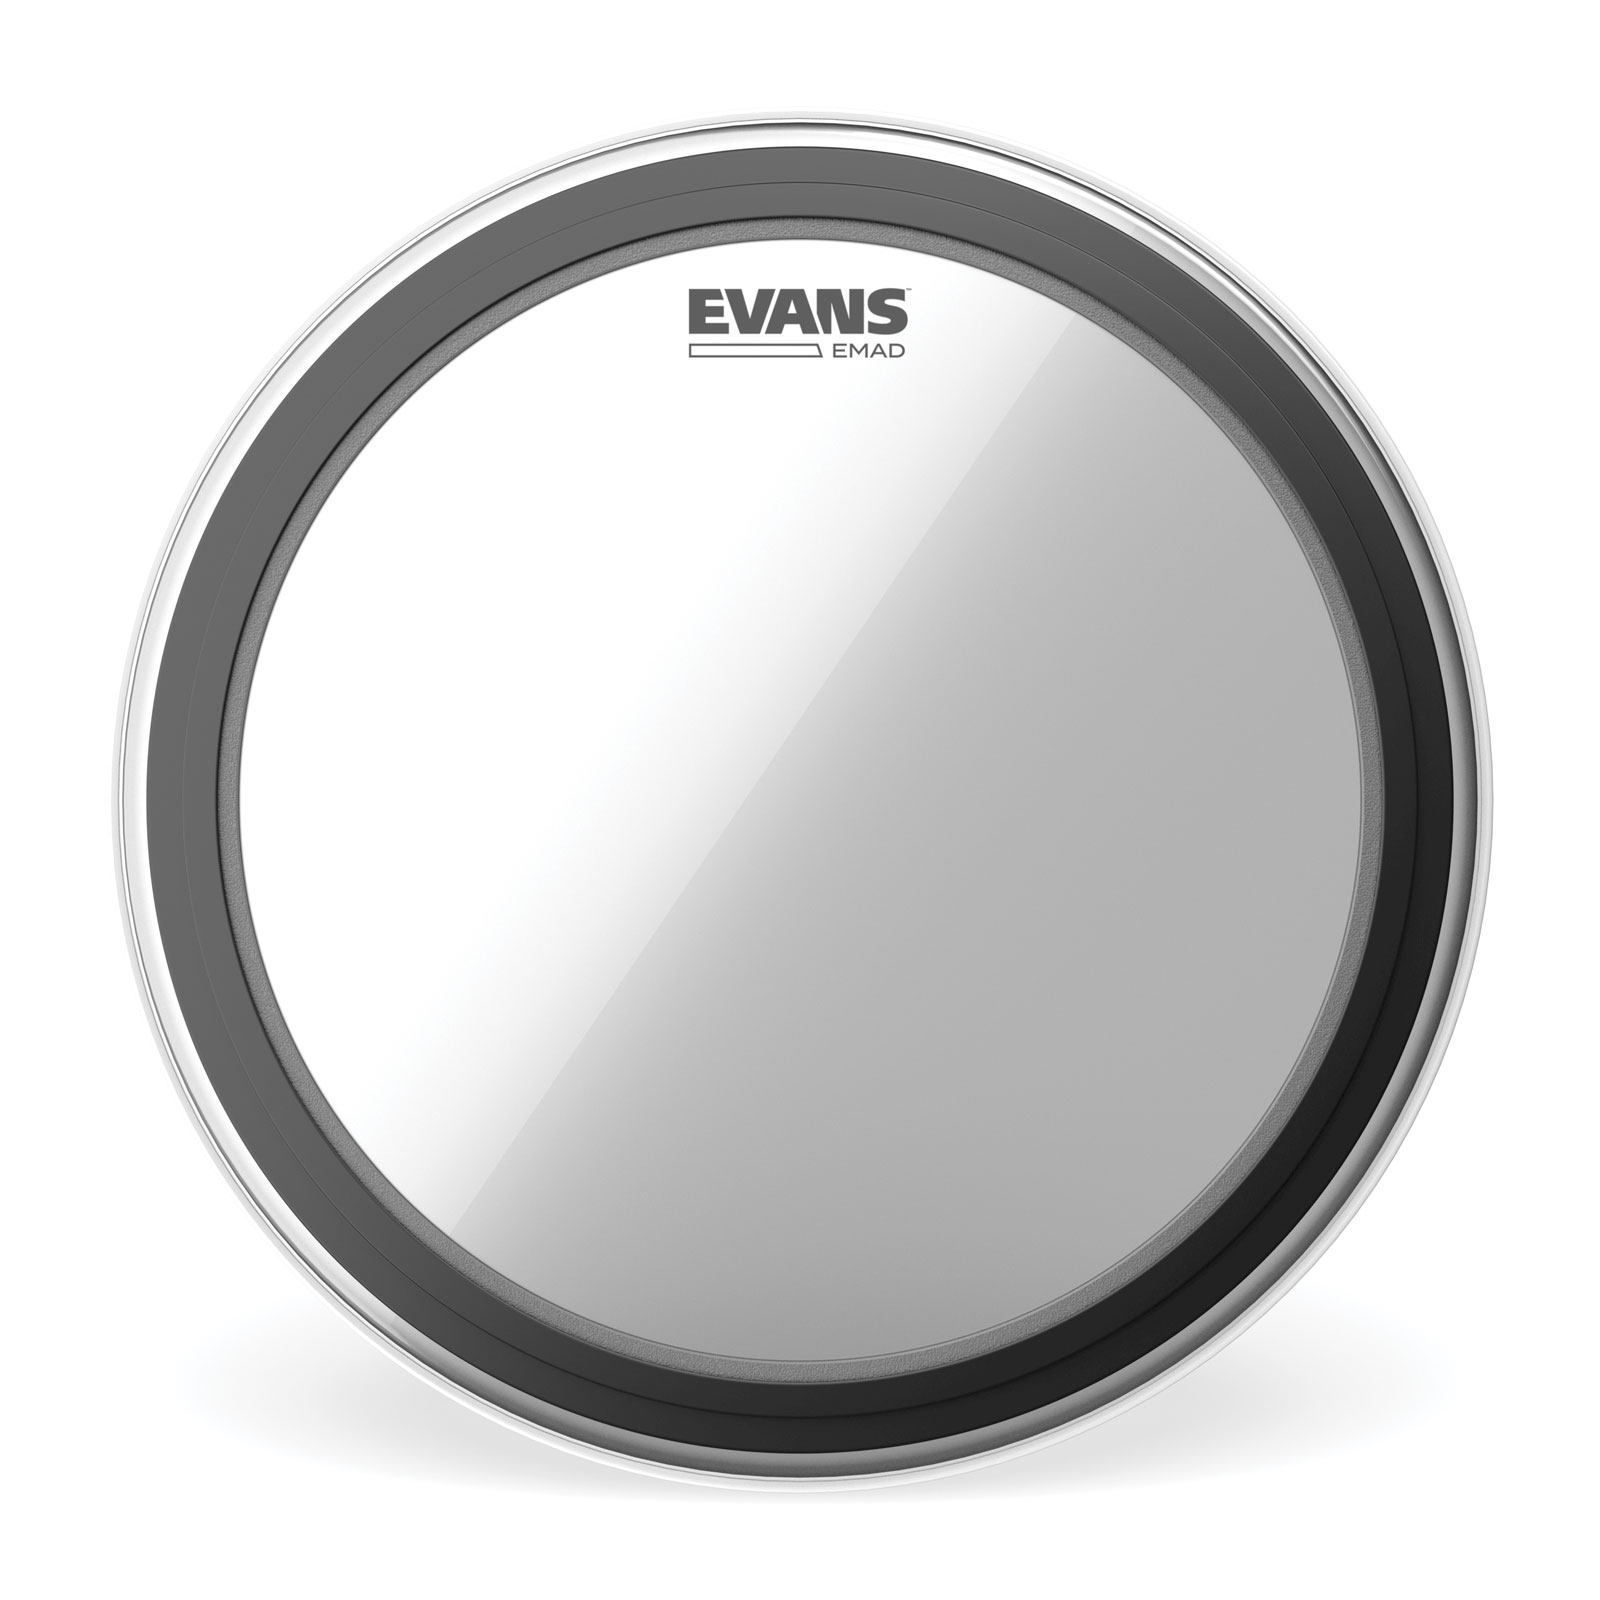 EVANS BD18EMAD - EMAD CLEAR 18